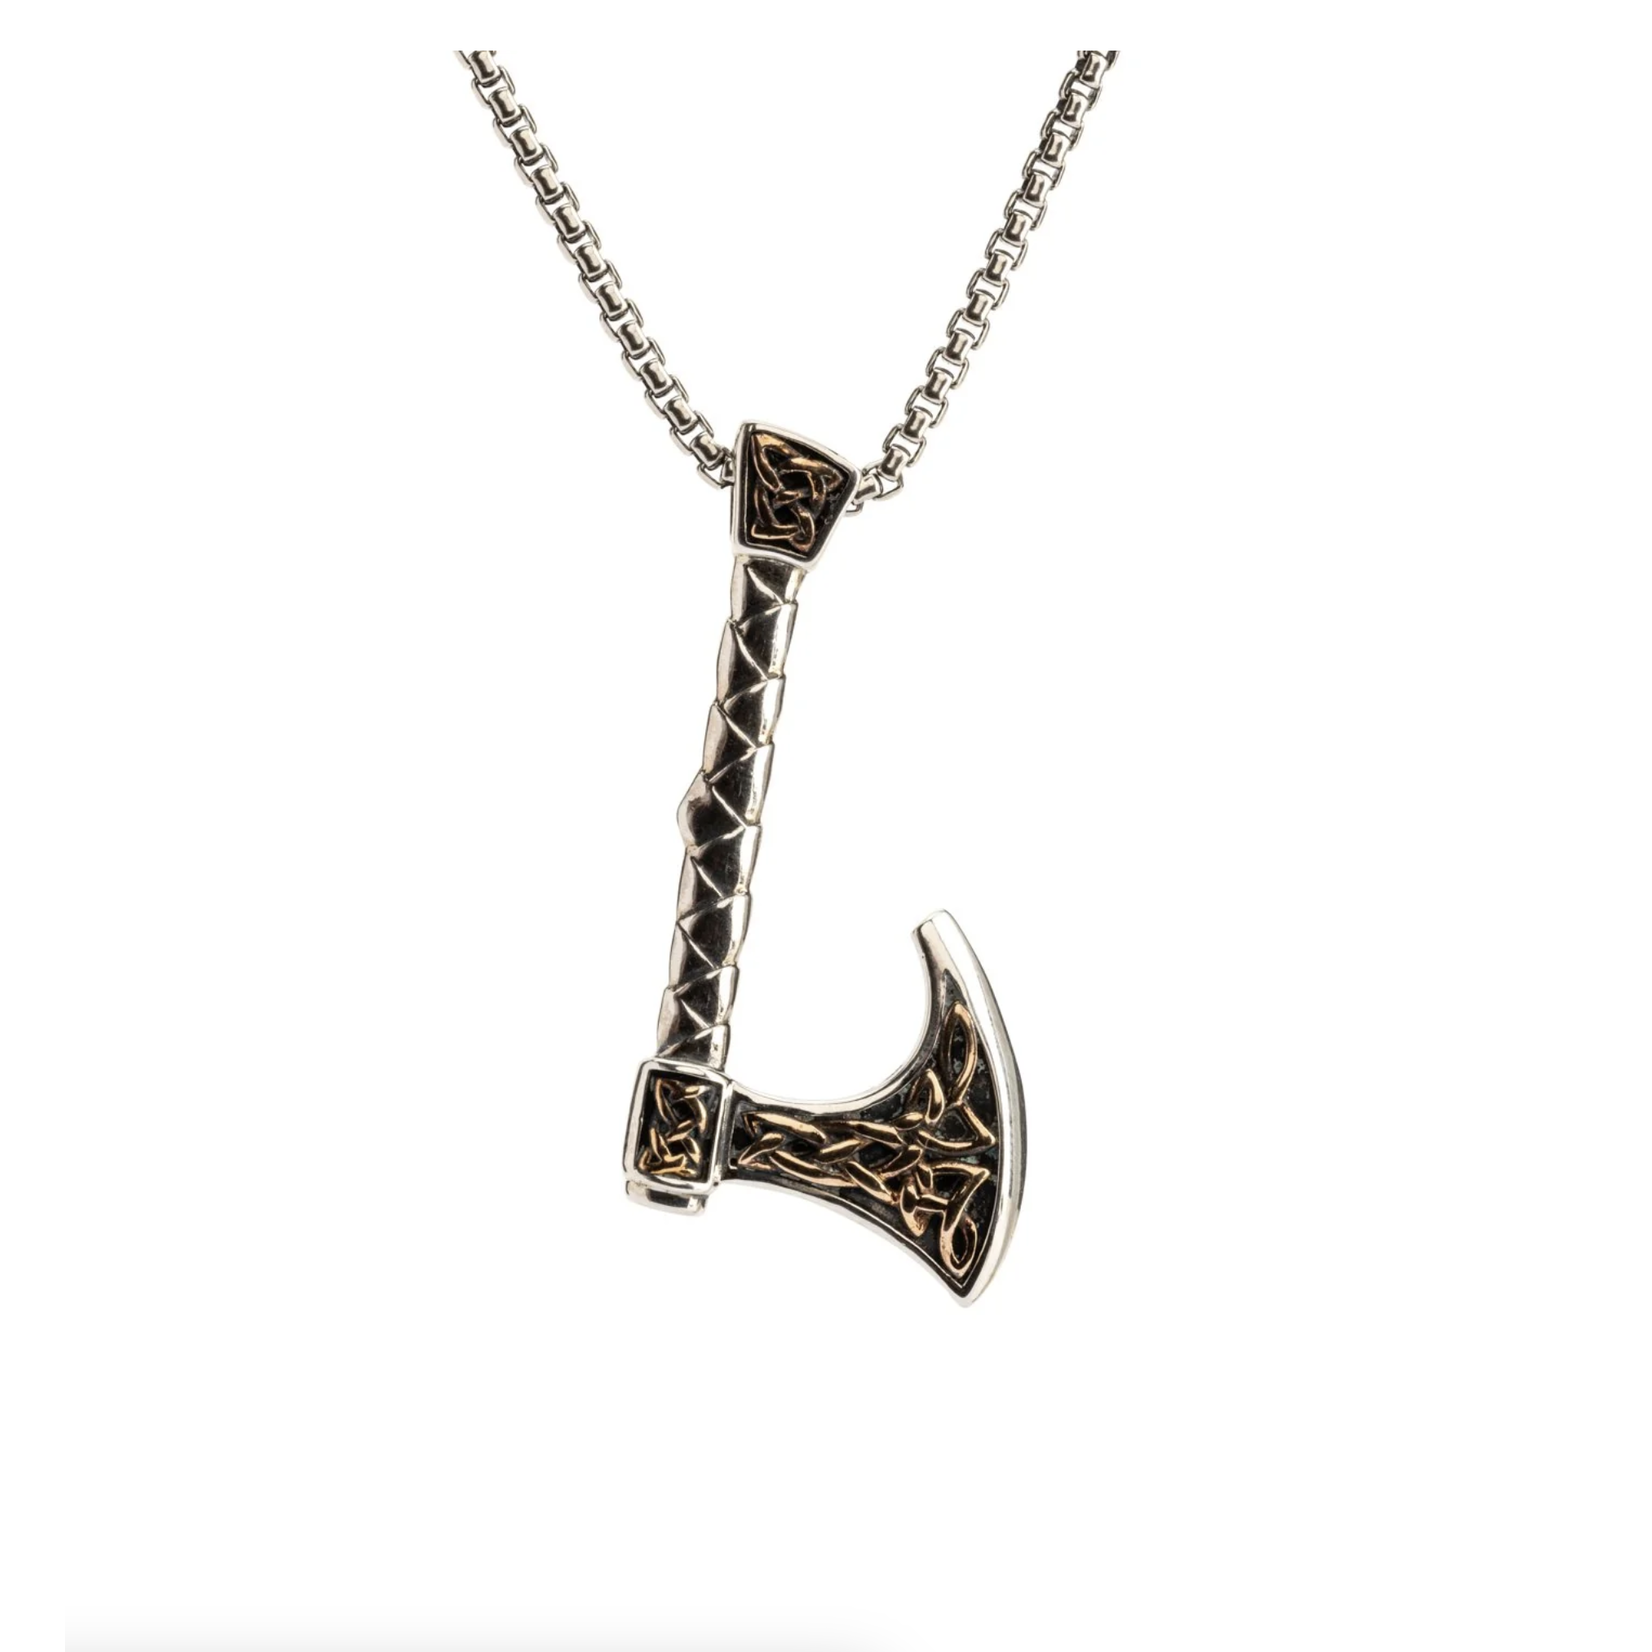 Keith Jack Silver and Bronze Viking Warrior Axe Necklace